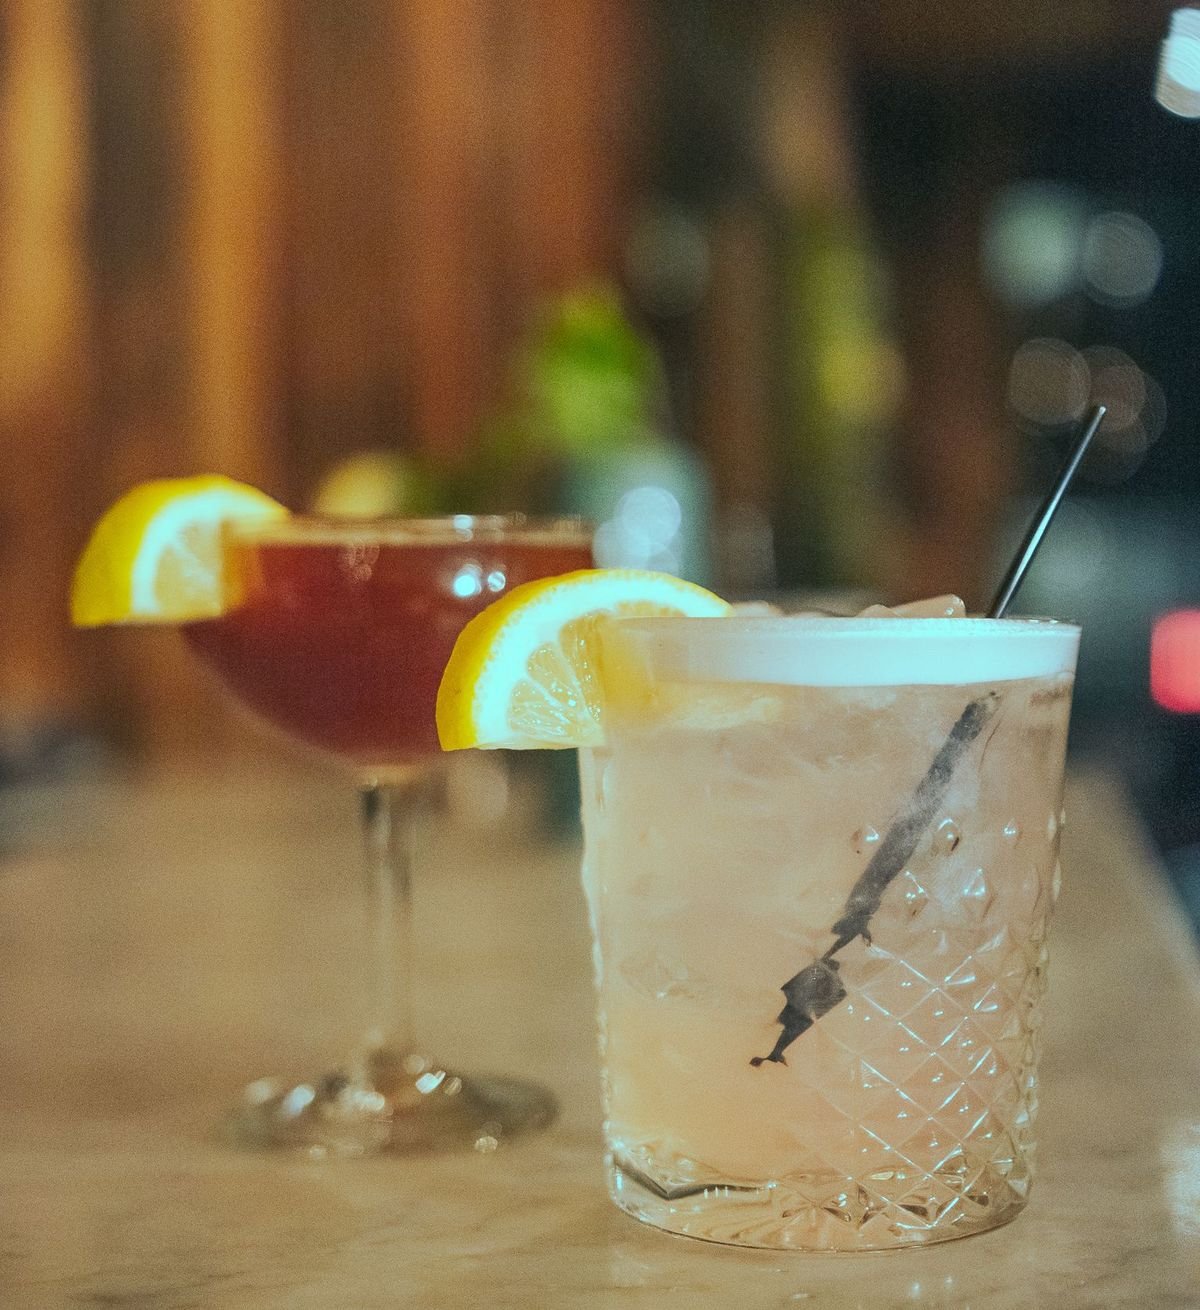    Hidden Lane     (129 E. 15th St.) has you covered if you're workin' 9am - 5pm, with a special holiday happy hour menu from 5pm - 8pm, Monday to Friday. Grab drinks with friends and coworkers with specially priced cocktails include Hidden Lane's Ho